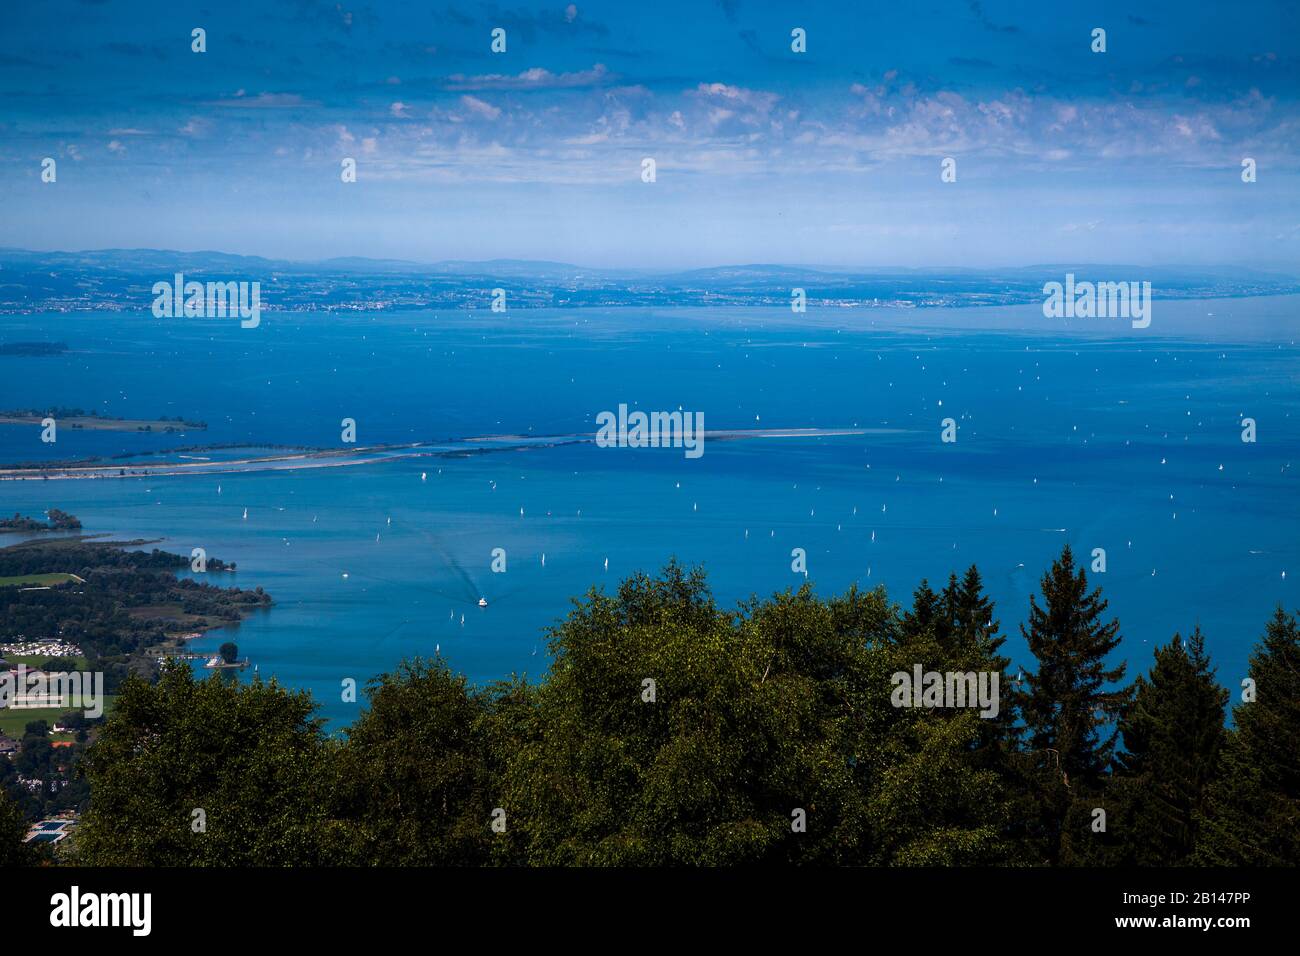 Bodensee with Rhine inflow and deep blue water with south bank, Bregenz, Vorarlberg, Austria, Europe Stock Photo